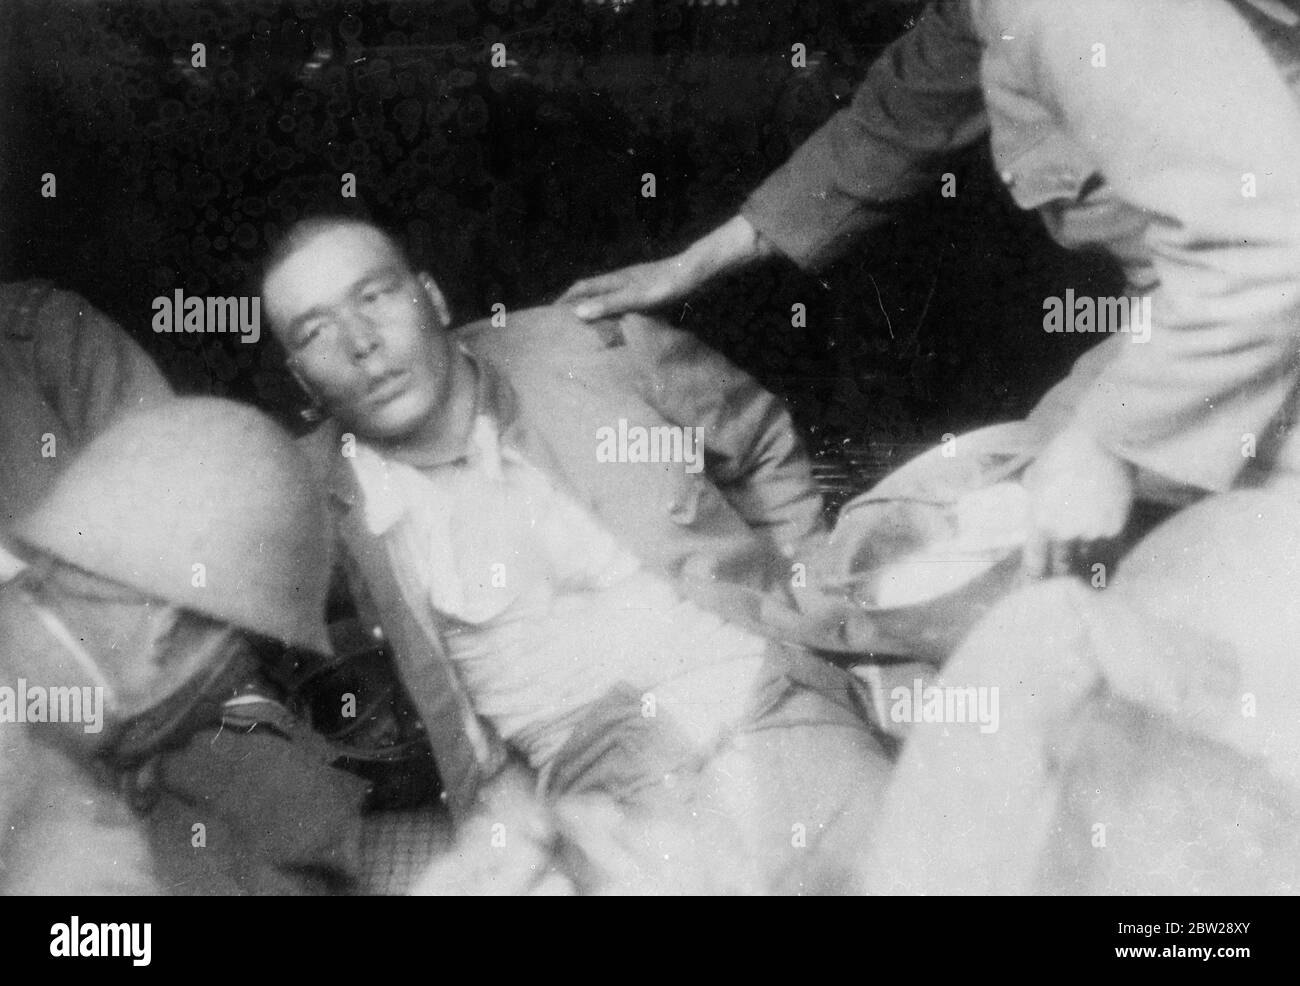 Chinese who threw hand grenade at Japanese 'Victory March' shot by Chinese policeman in International Settlement. Exclusive pictures of the incident. These exclusive pictures, just received in London, were taken when a Chinese threw a hand grenade in the mist of 5000 Japanese soldiers who were taking part in a victory march through the International Settlement at Shanghai. Several of the Japanese were injured and the Chinese who was responsible for the explosion was shot dead by a Chinese policeman of the settlement. The incident was followed by great confusion, the Japanese troops scattering Stock Photo